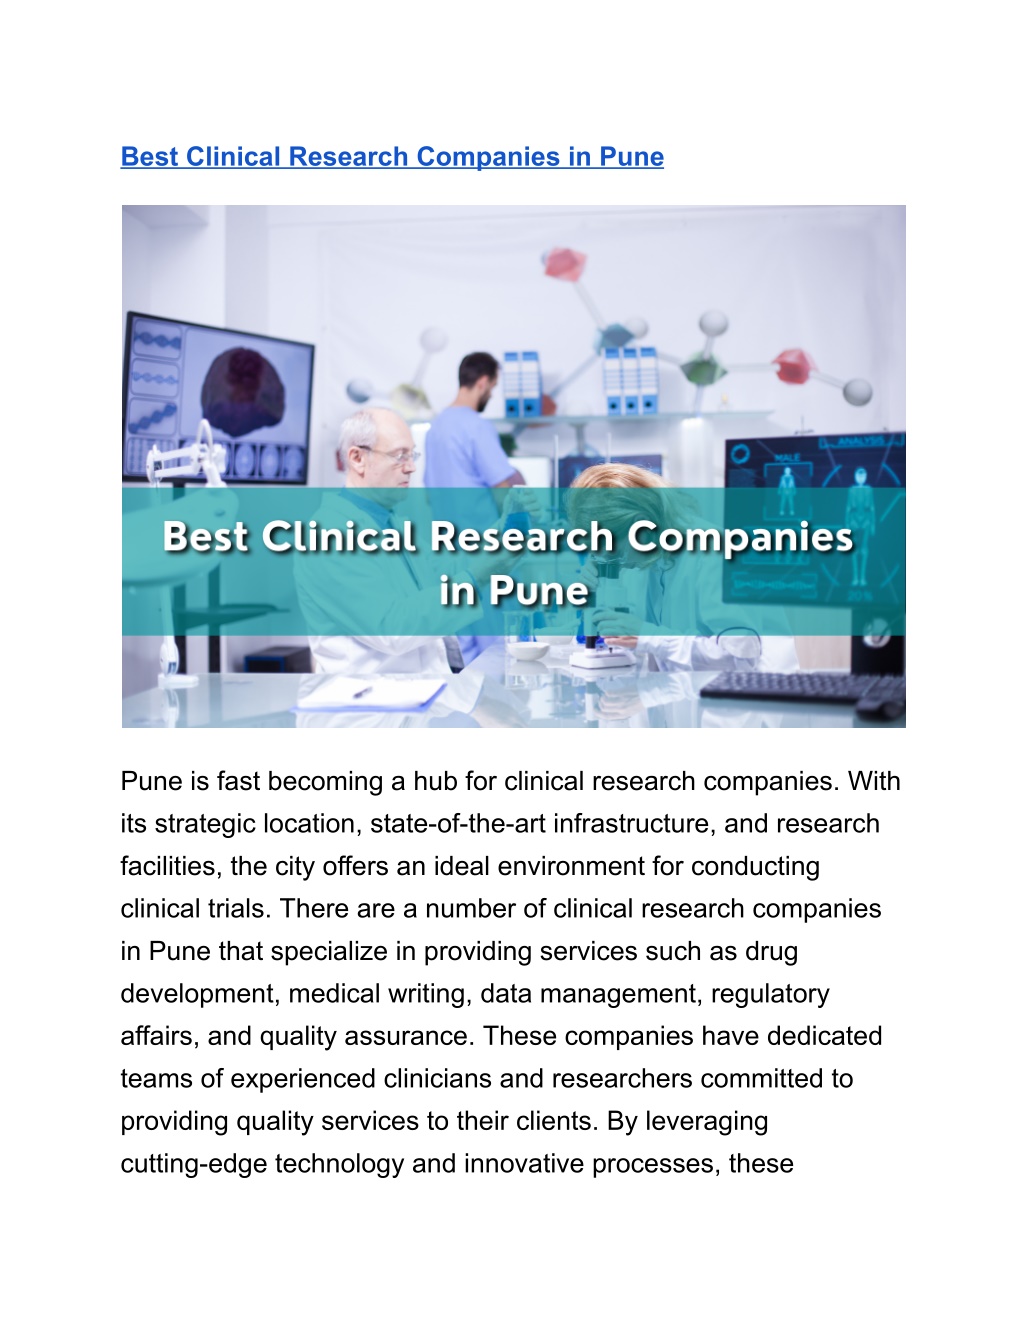 healthcare market research companies in pune